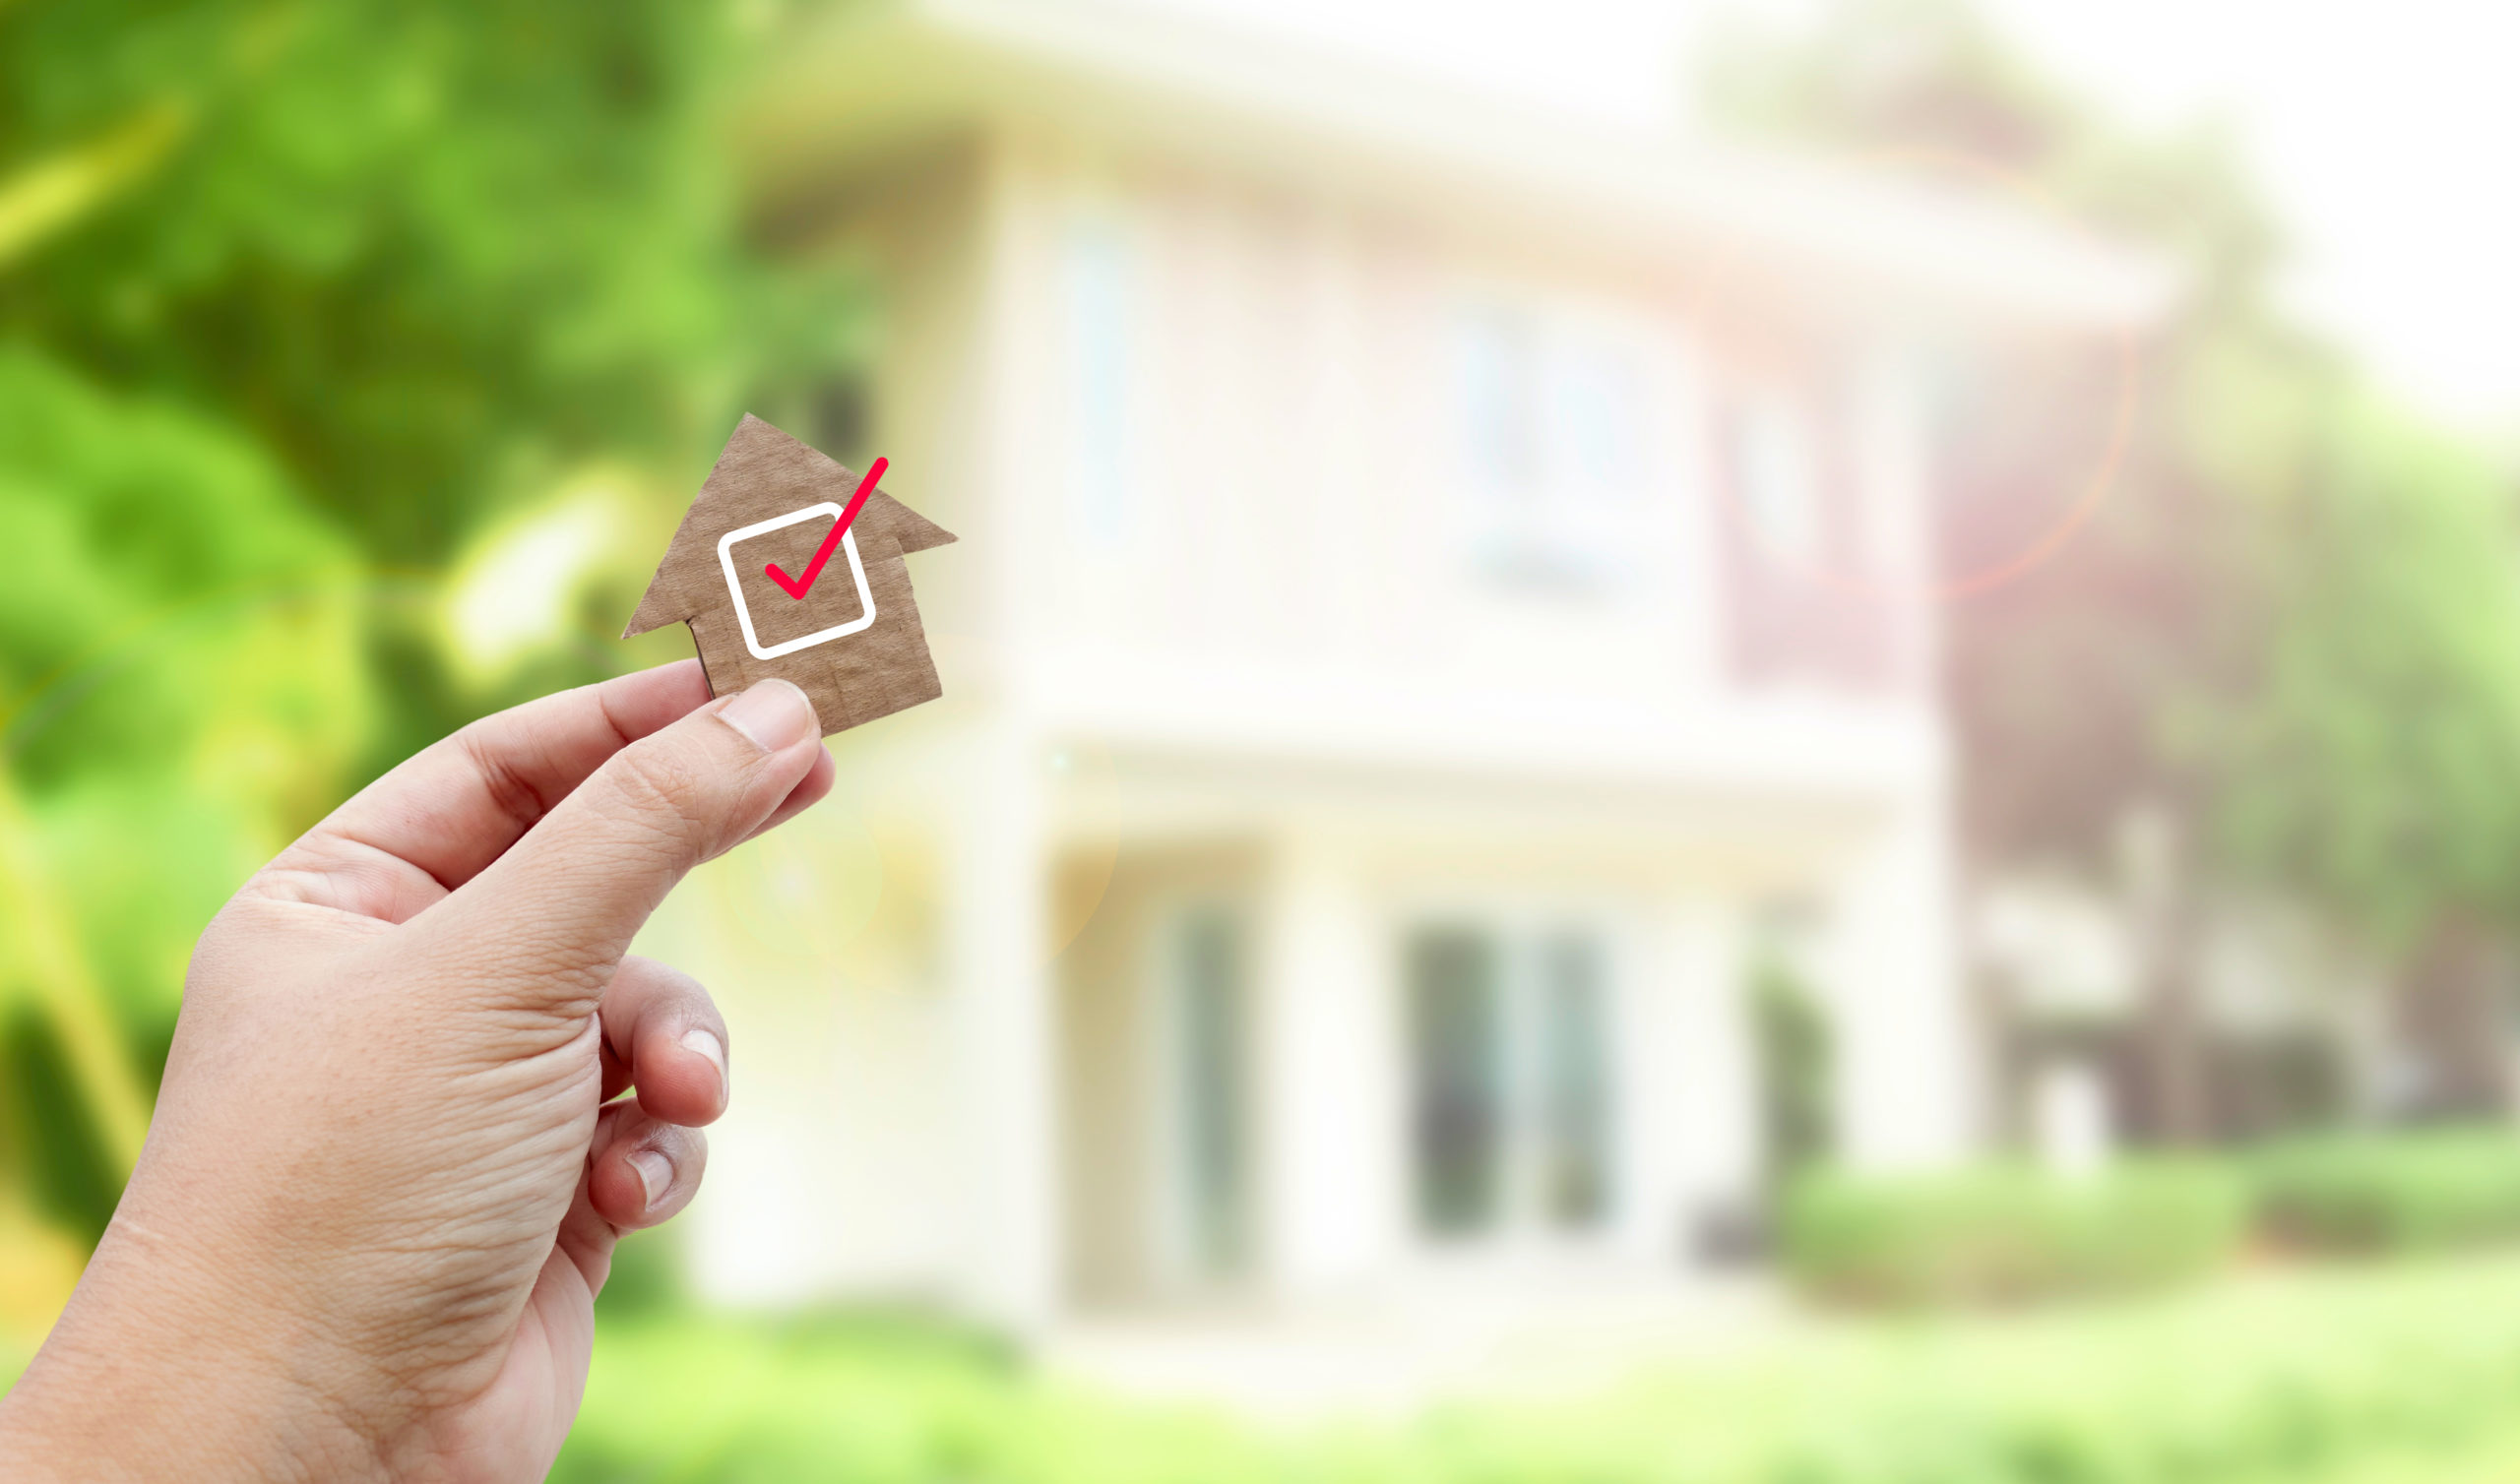 What’s The Difference Between a Home Appraisal and a Home Inspection?